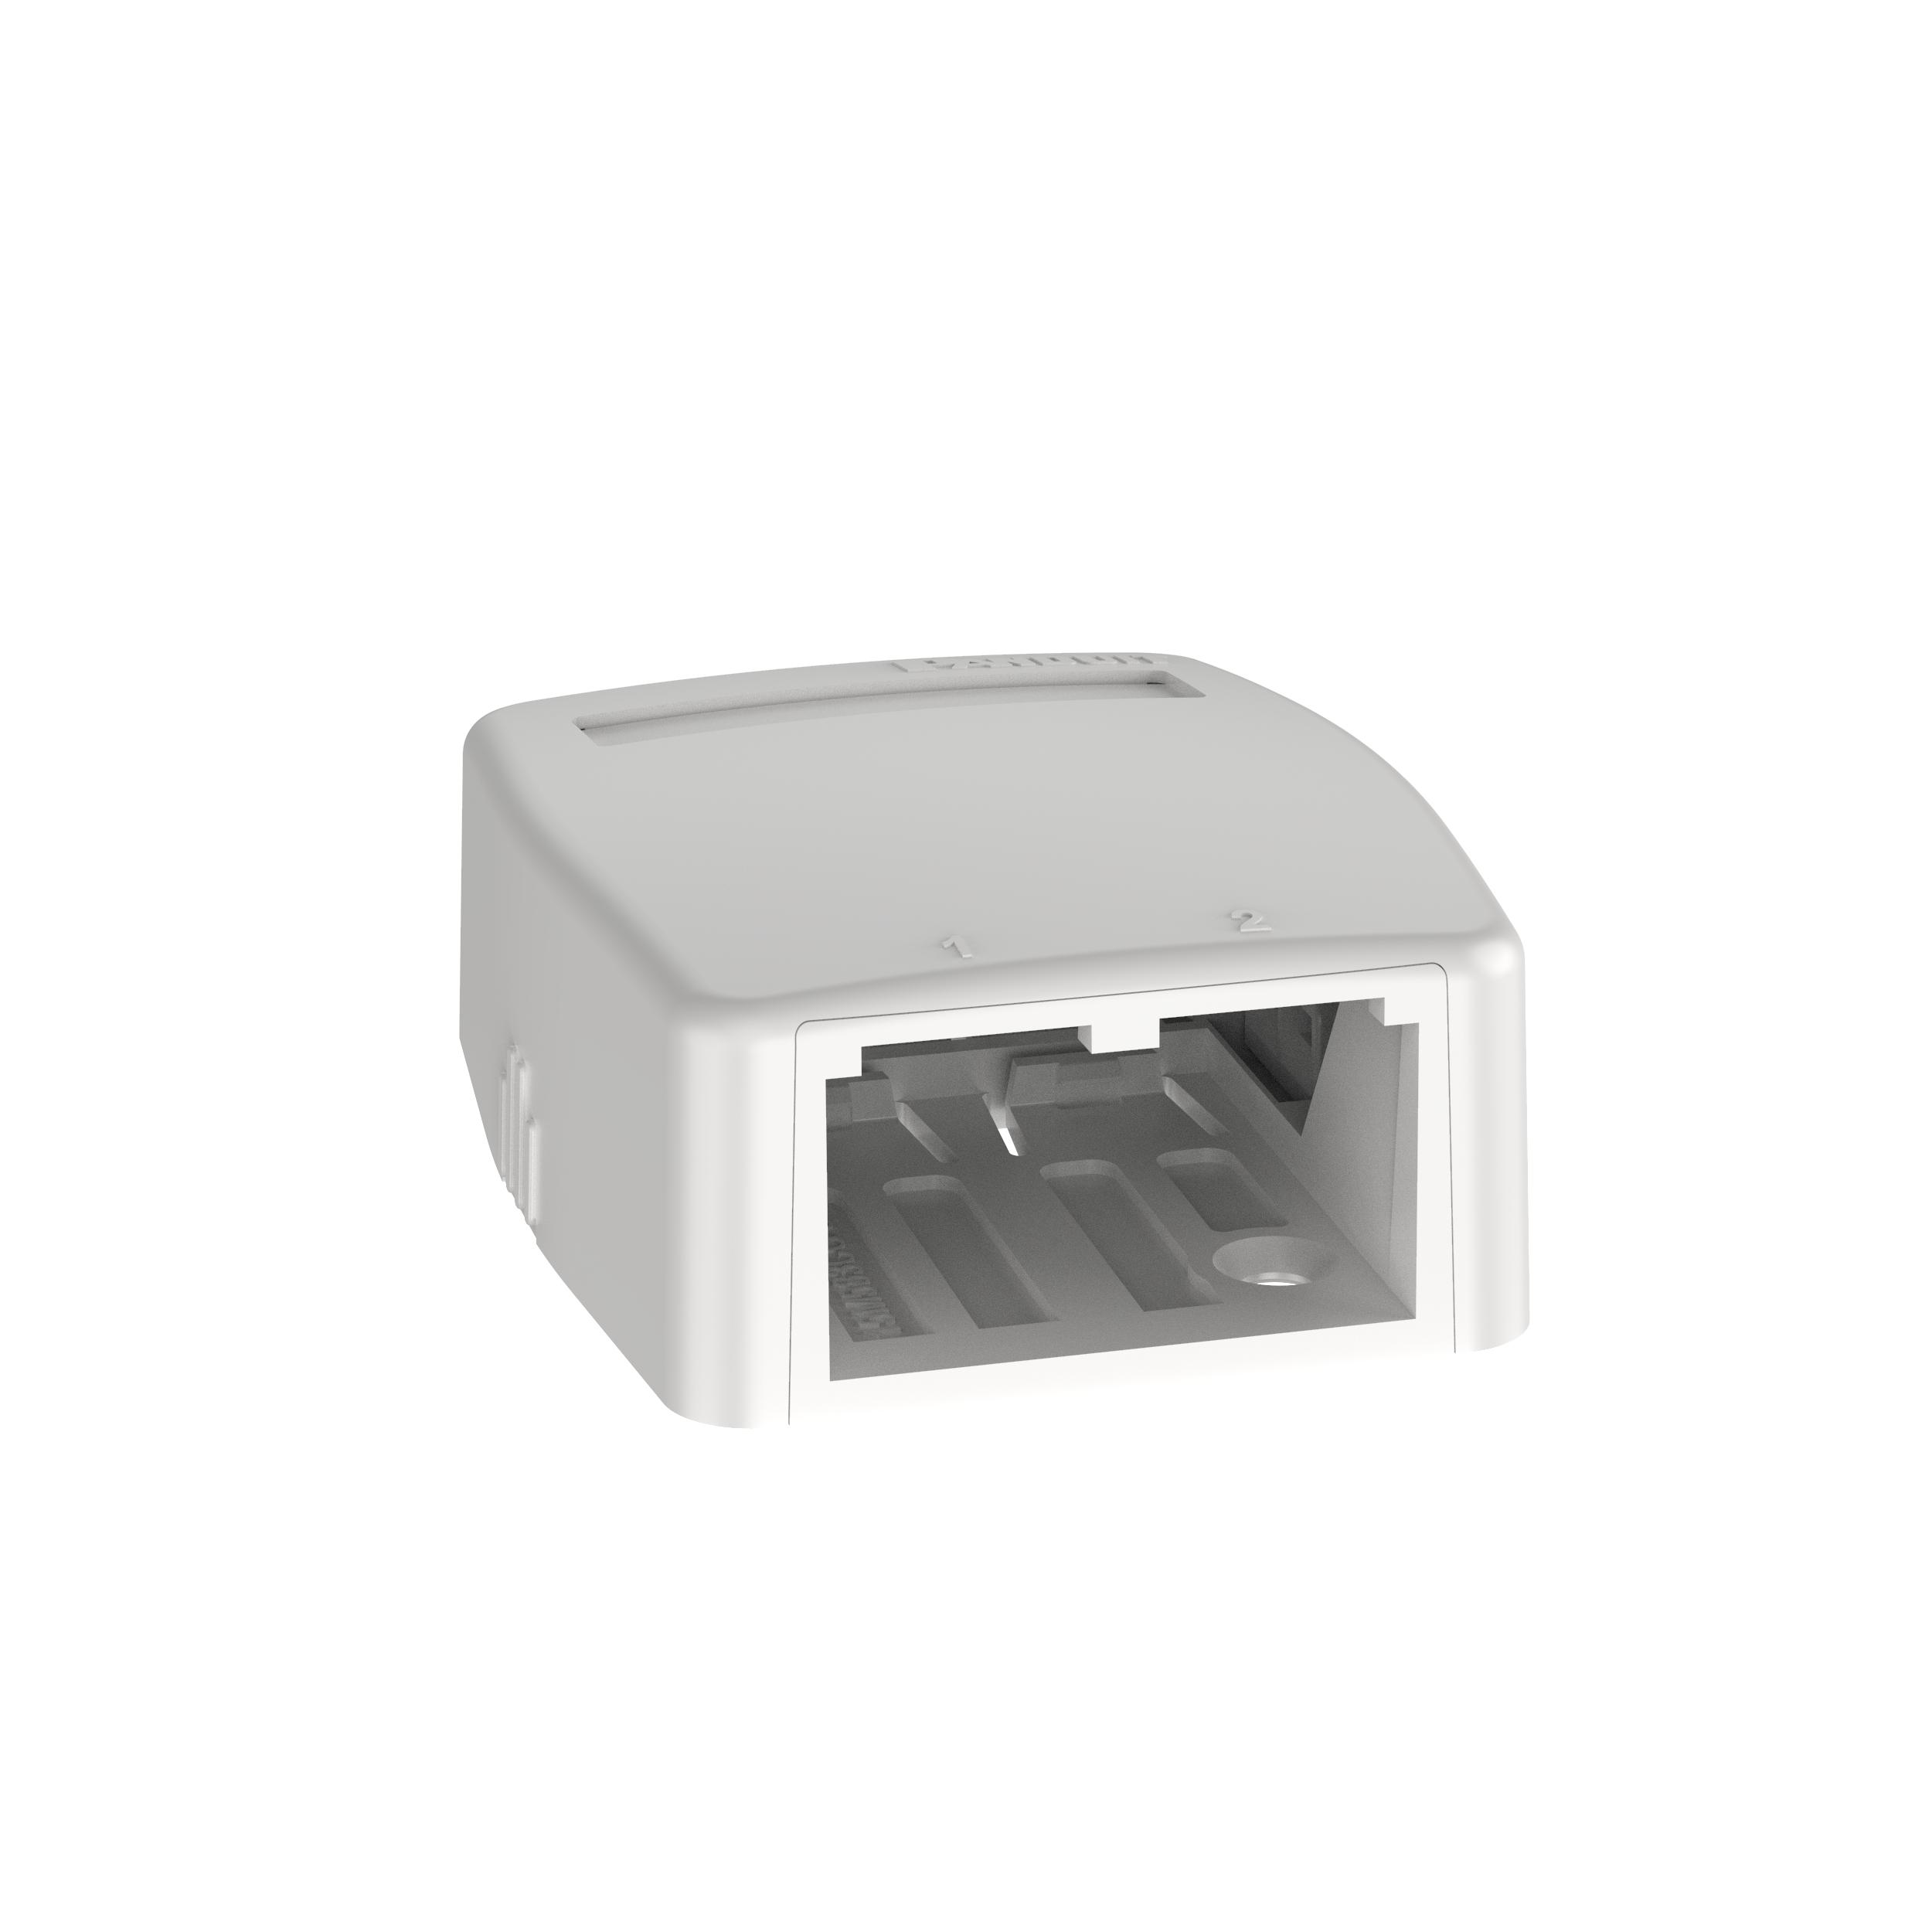 Panduit CBXQ2IW-A SURFACE MNT BOX 2-PORT MINICOMW/ QUICK RELEASE COVER ANDADHESIVE, OFF WHITE